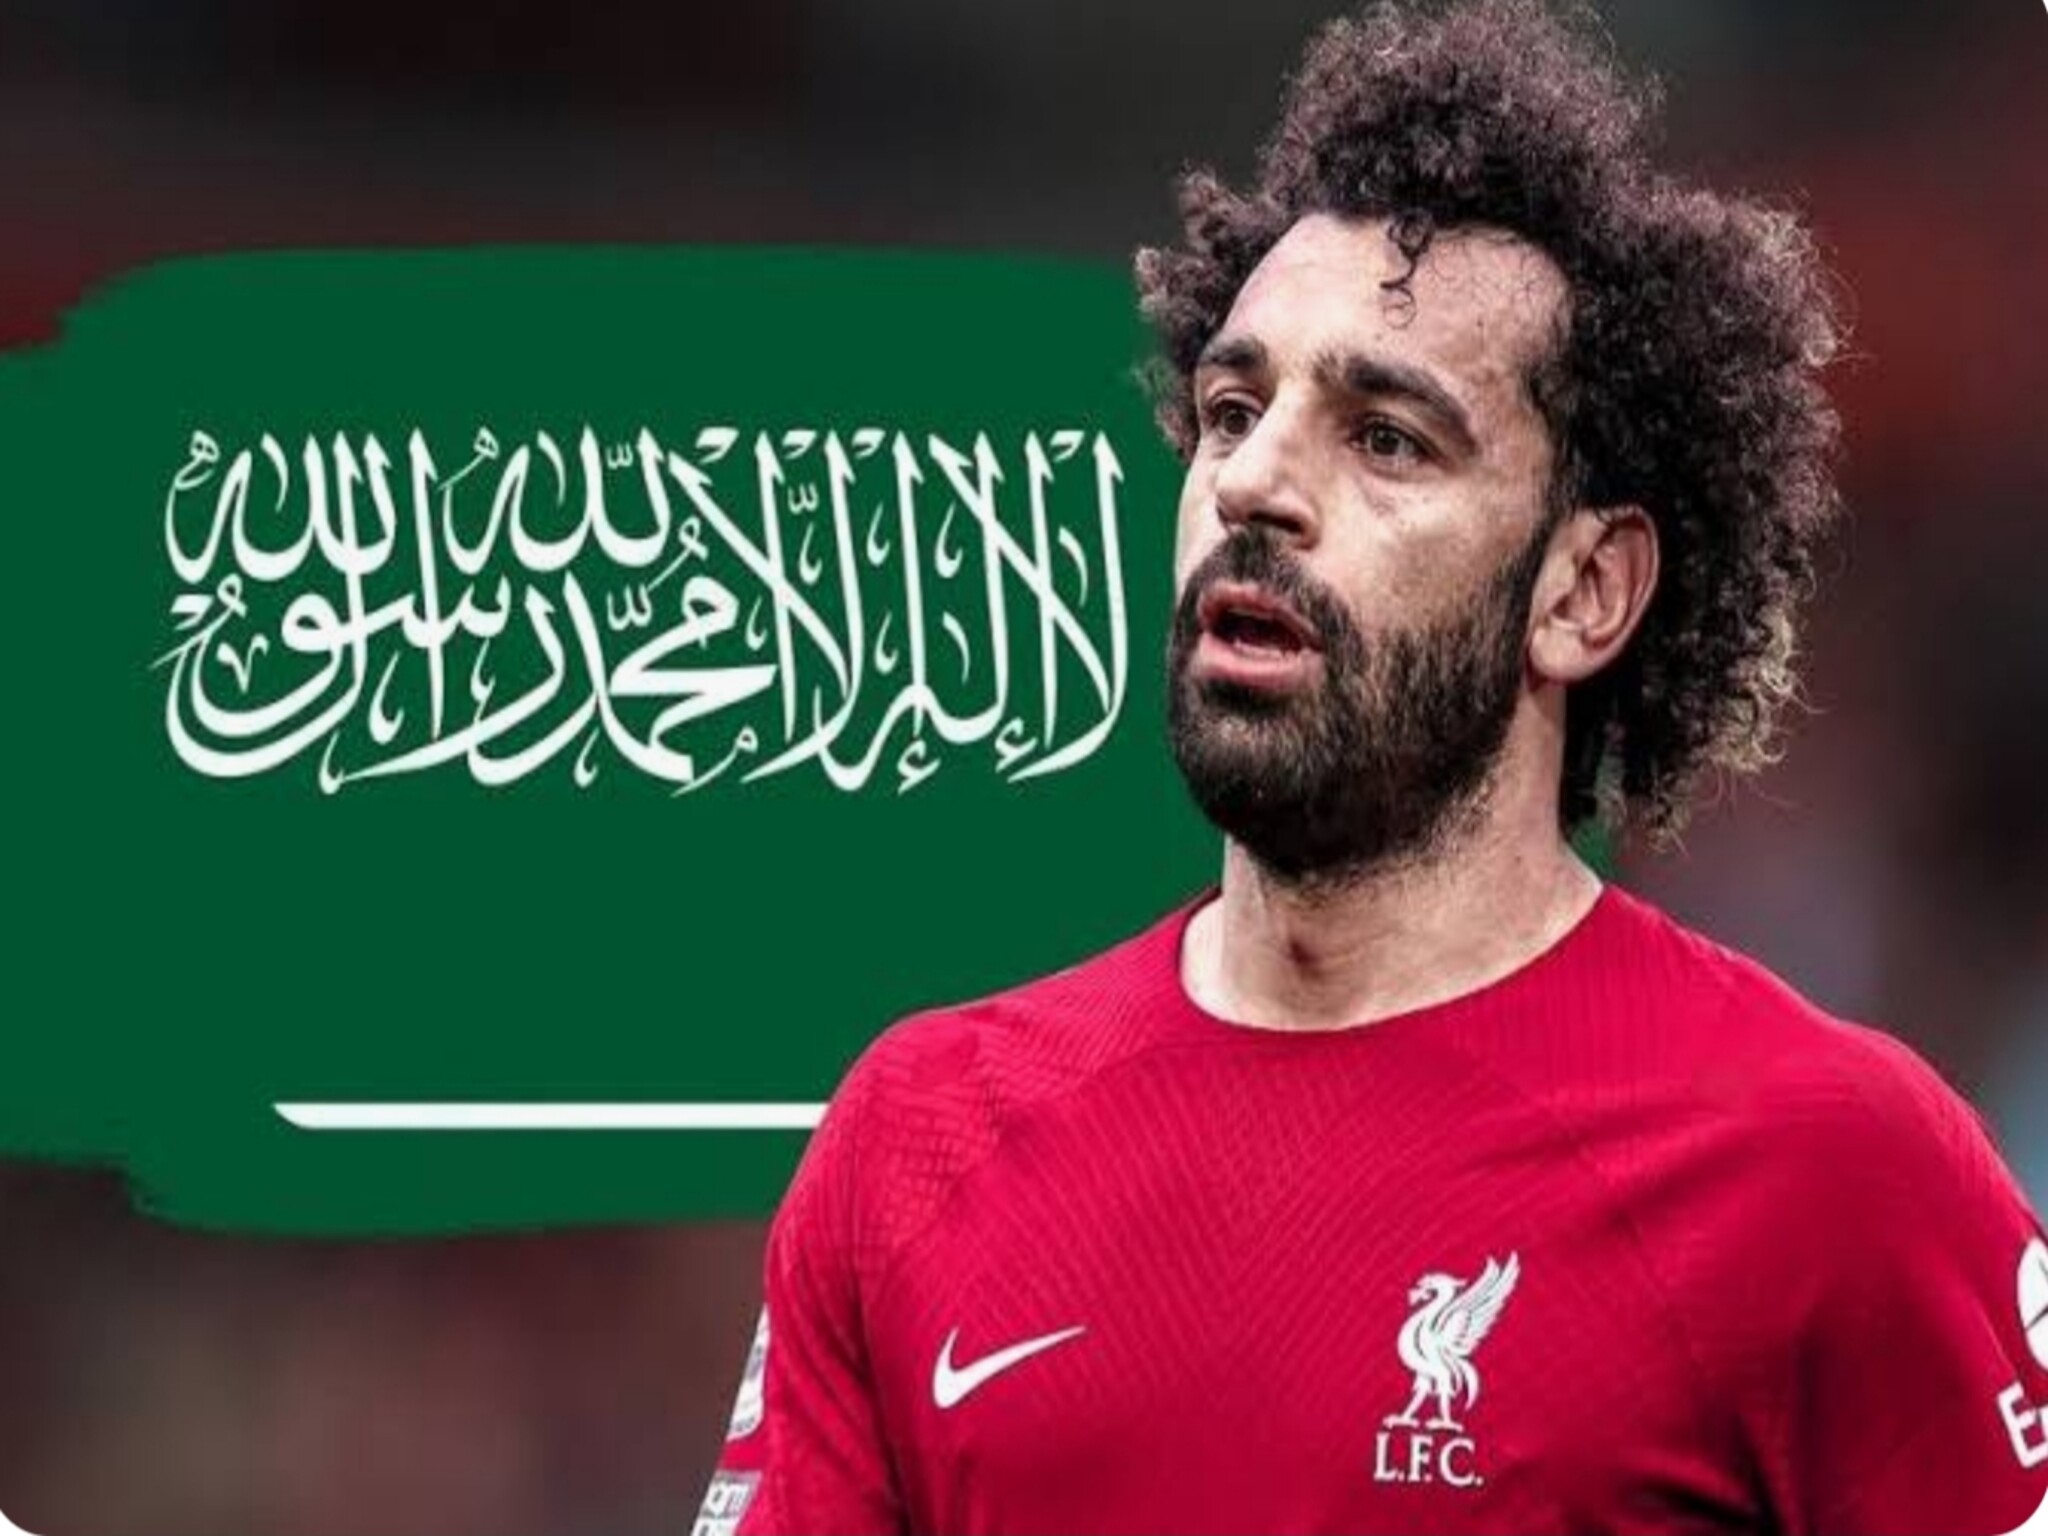 A historic deal between Mohamed Salah, the English star of Liverpool, and Al-Ittihad Club, the champion of the